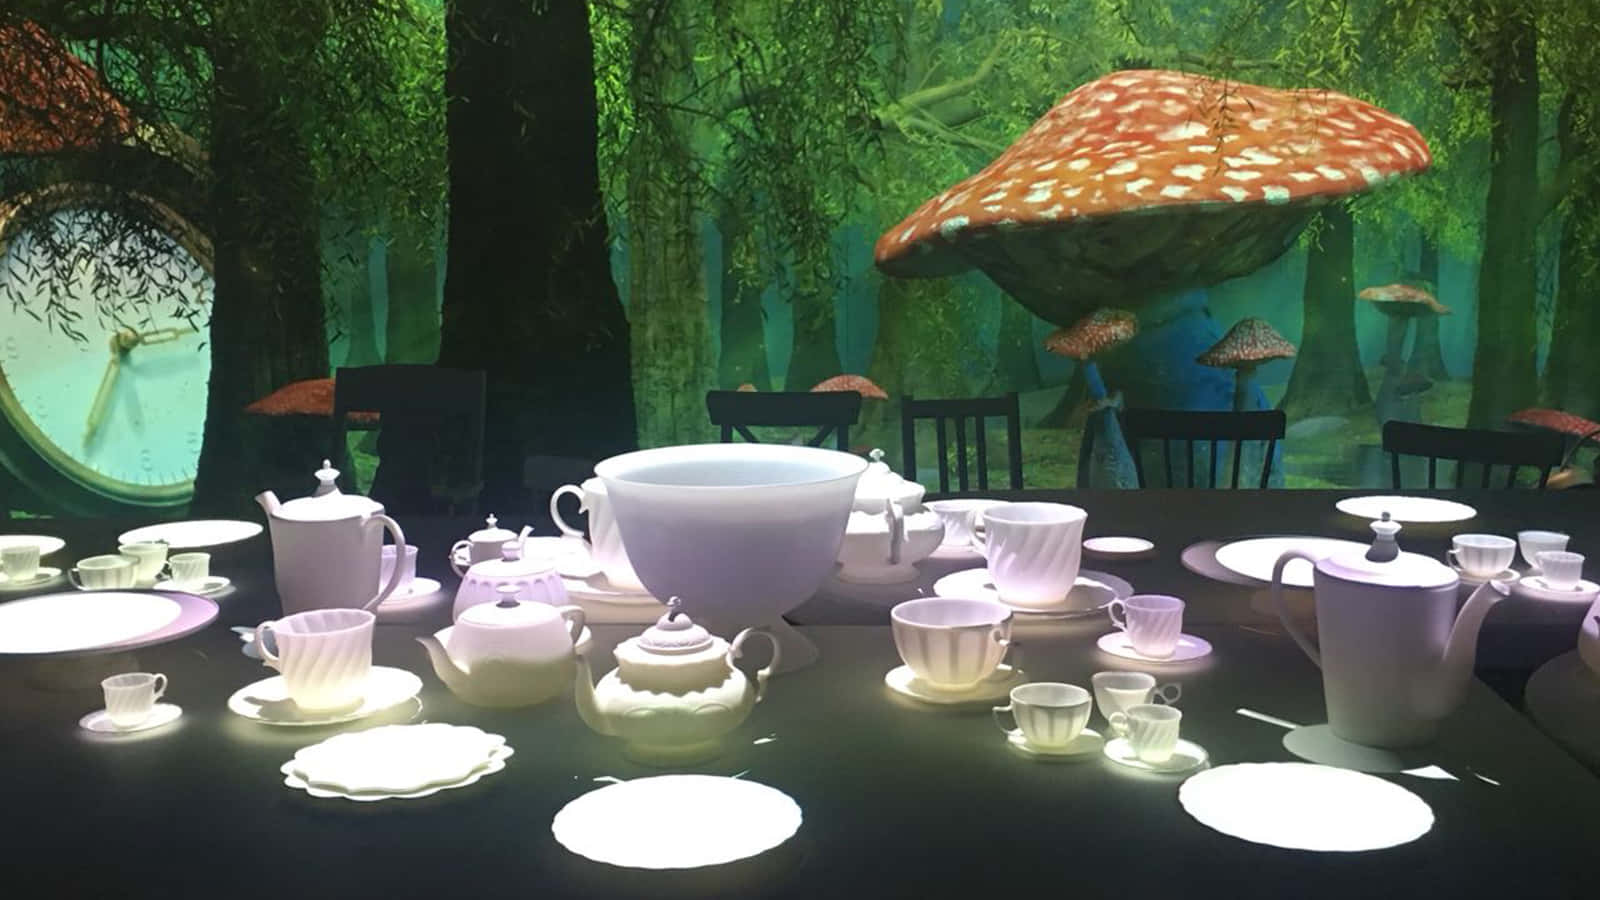 Celebrate in style with a Traditional Tea Party